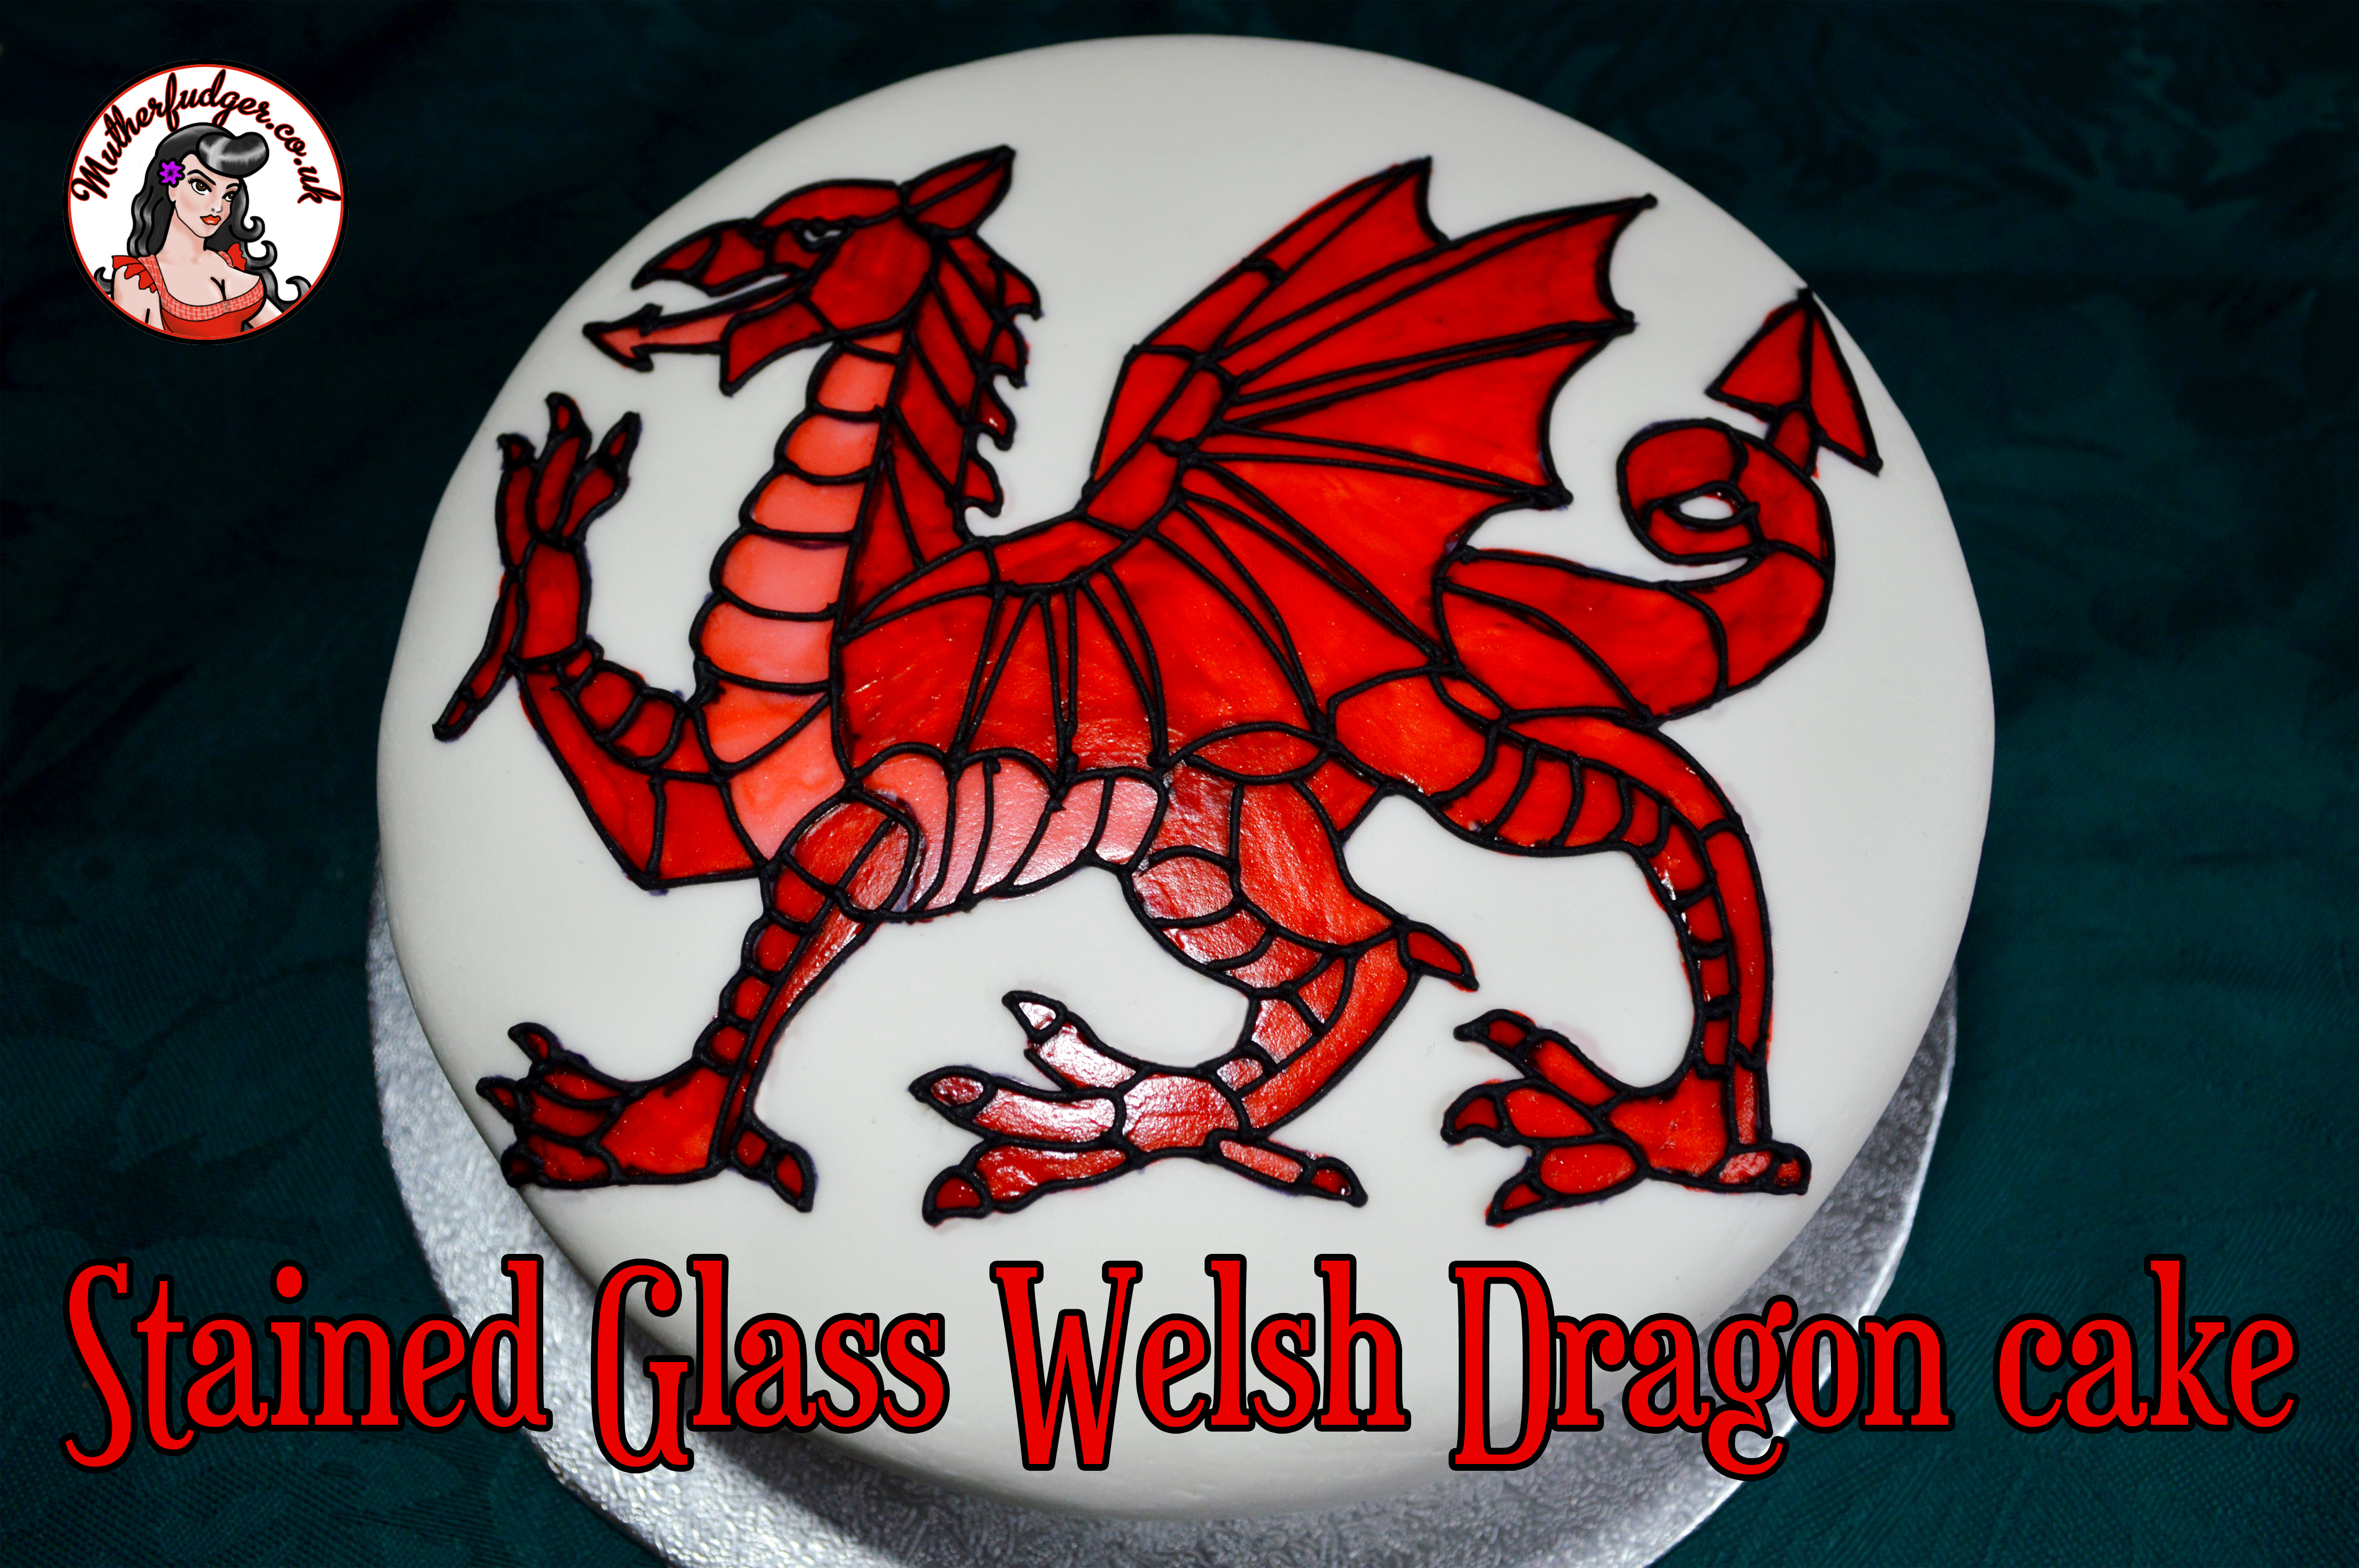 https://www.mutherfudger.co.uk/wp-content/uploads/2014/06/stained-glass-welsh-dragon-cake.jpg